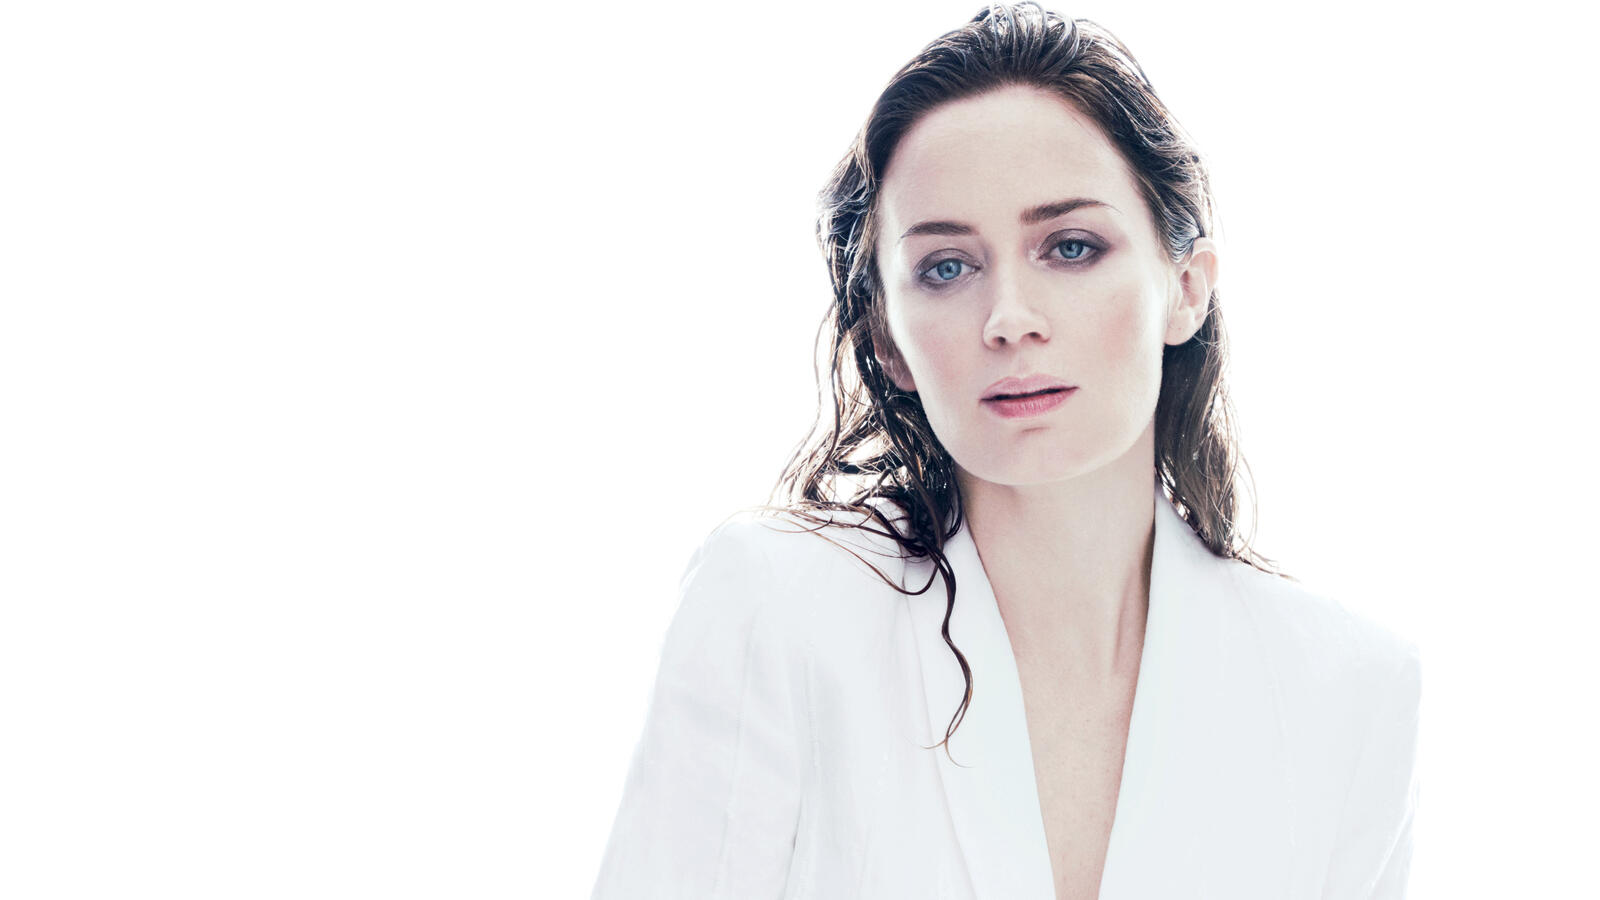 Wallpapers Emily Blunt white background celebrities on the desktop